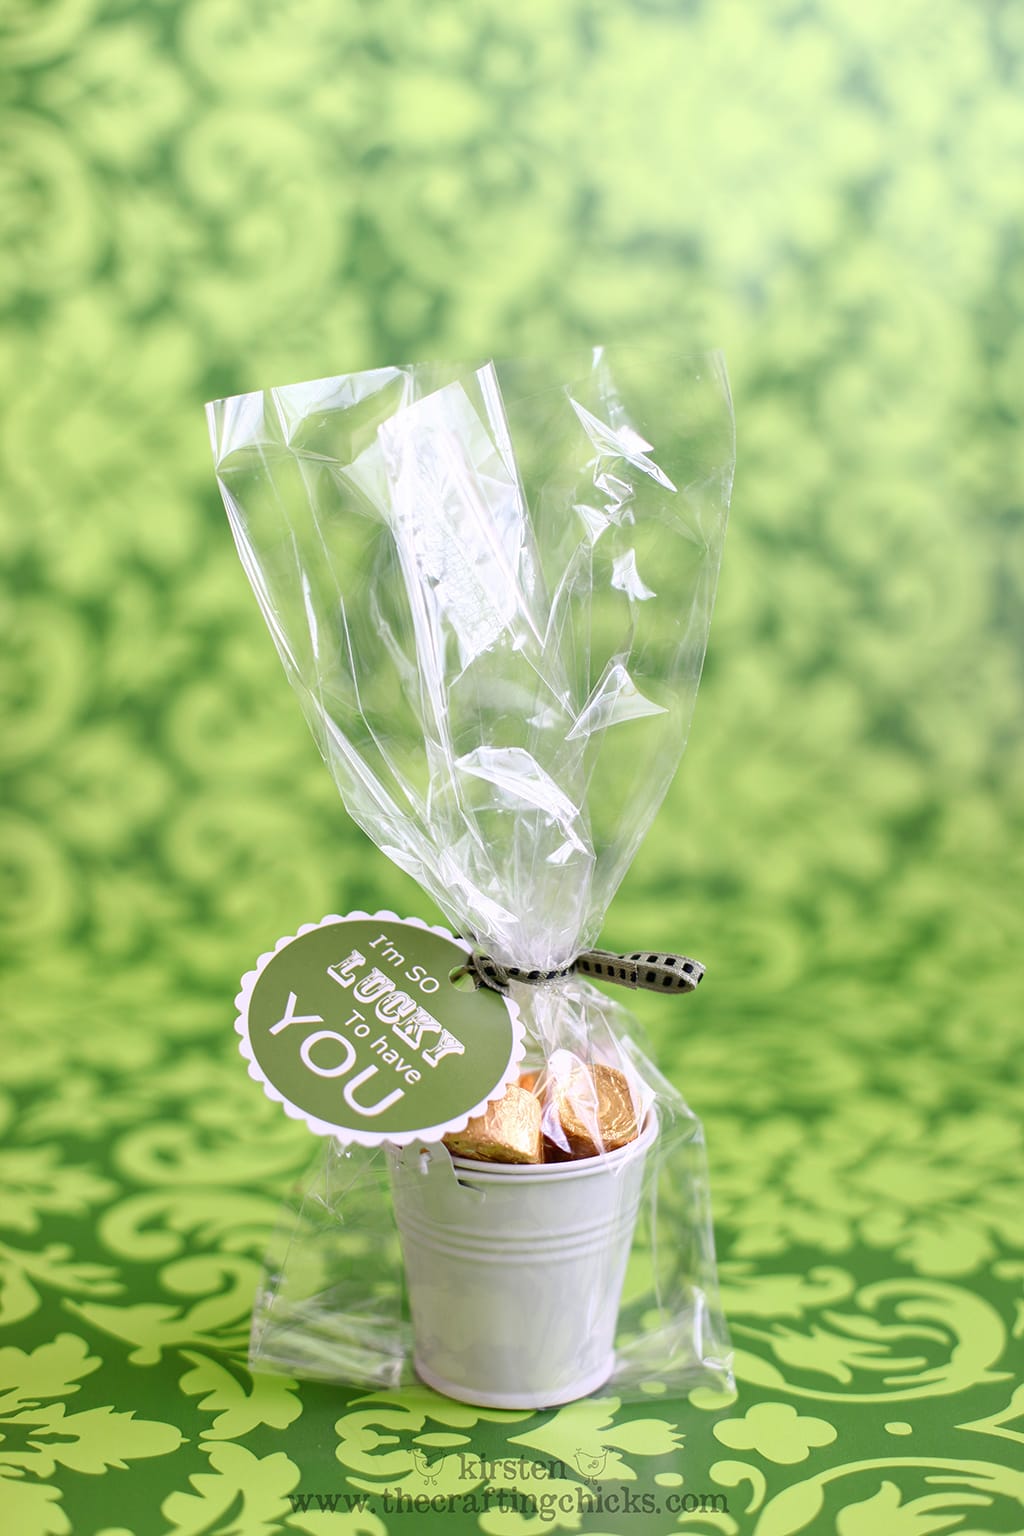 Green background withe small white buckets filled with gold wrapped candies in a clear cellophane bag and a green ribbon. A printable tag is attached that says "I'm so lucky to have you."